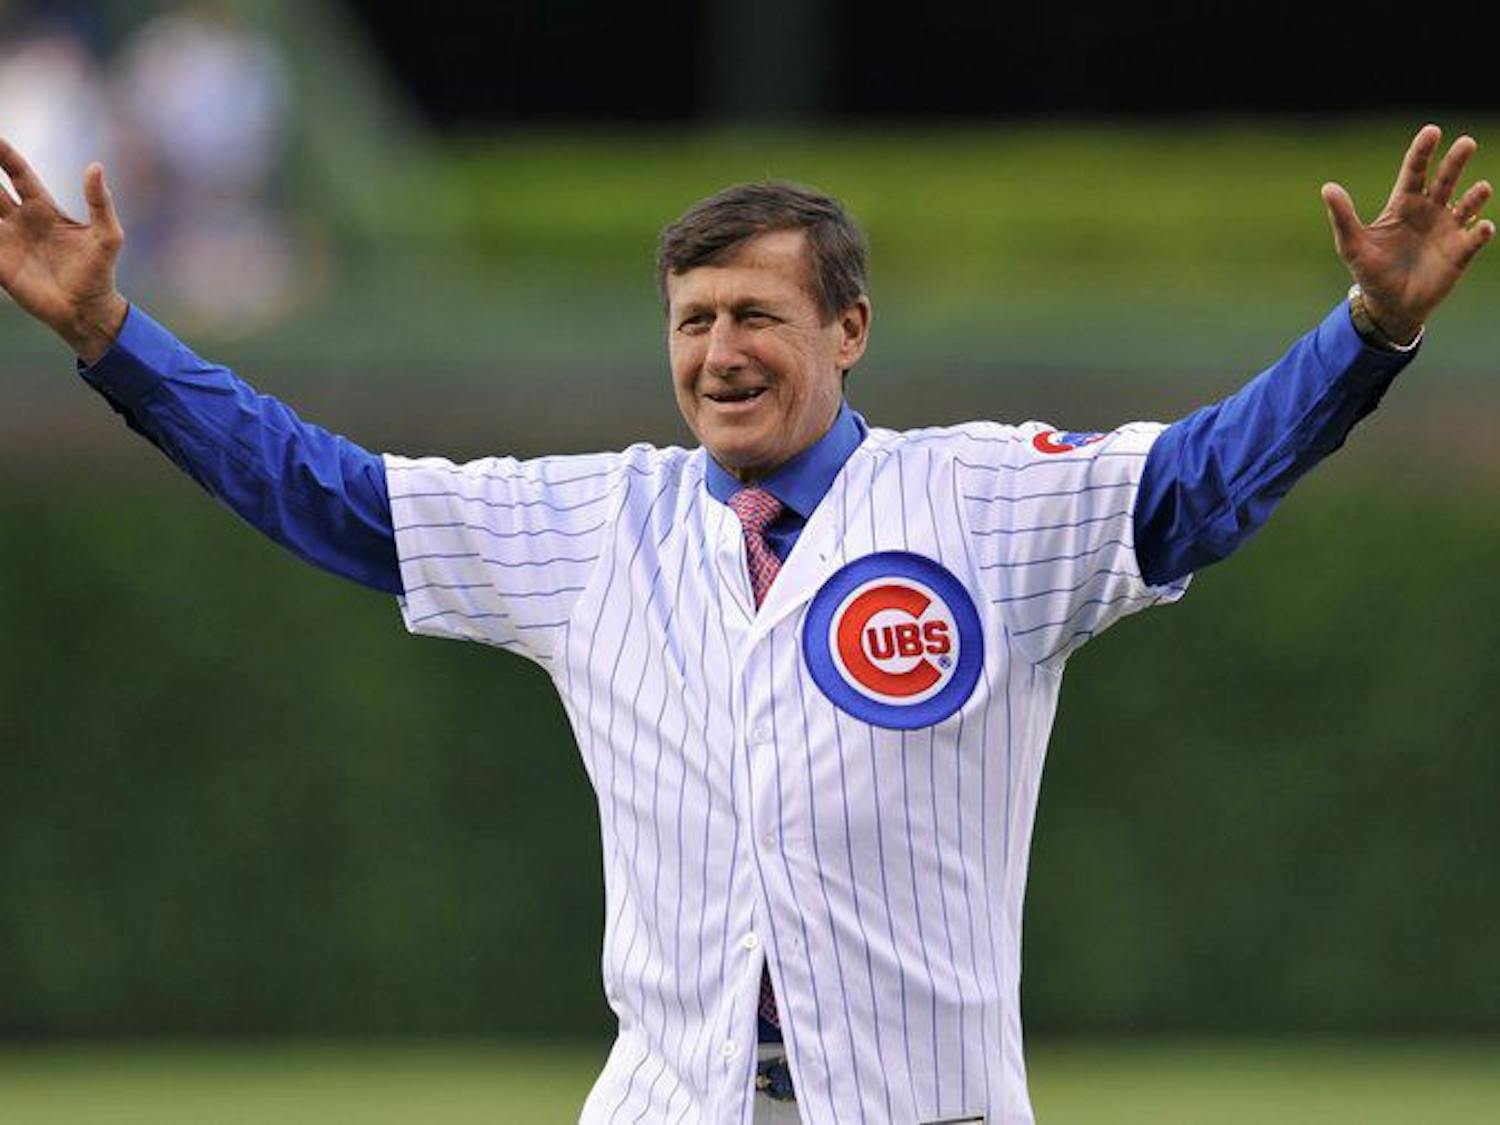 Craig Sager threw out the first pitch of a Cubs game in June 2016. He was a longtime NBA sideline reporter before his death in December 2016.